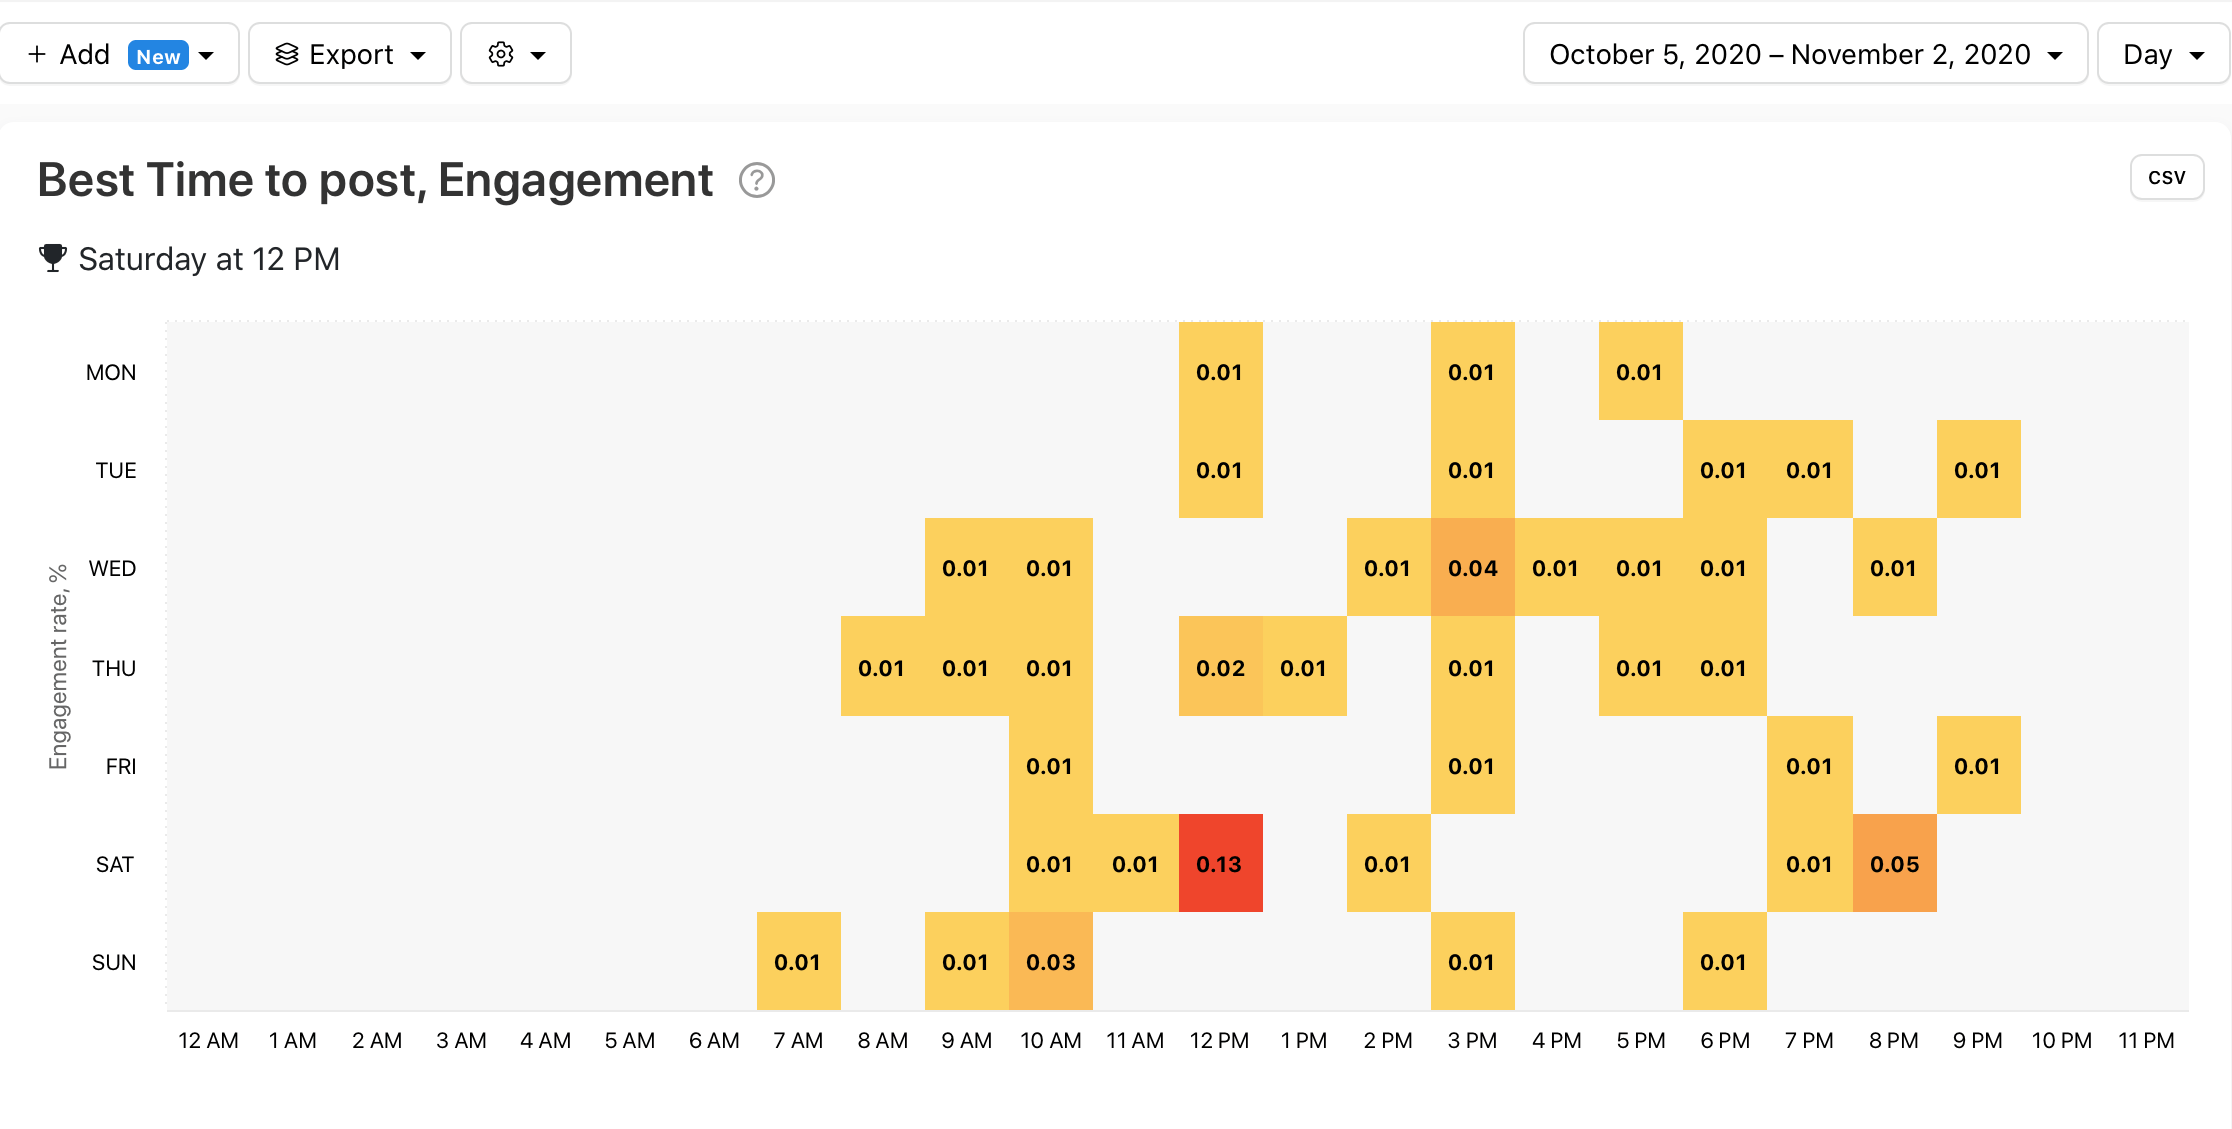 Best Time to post, Engagement graph by Minter.io